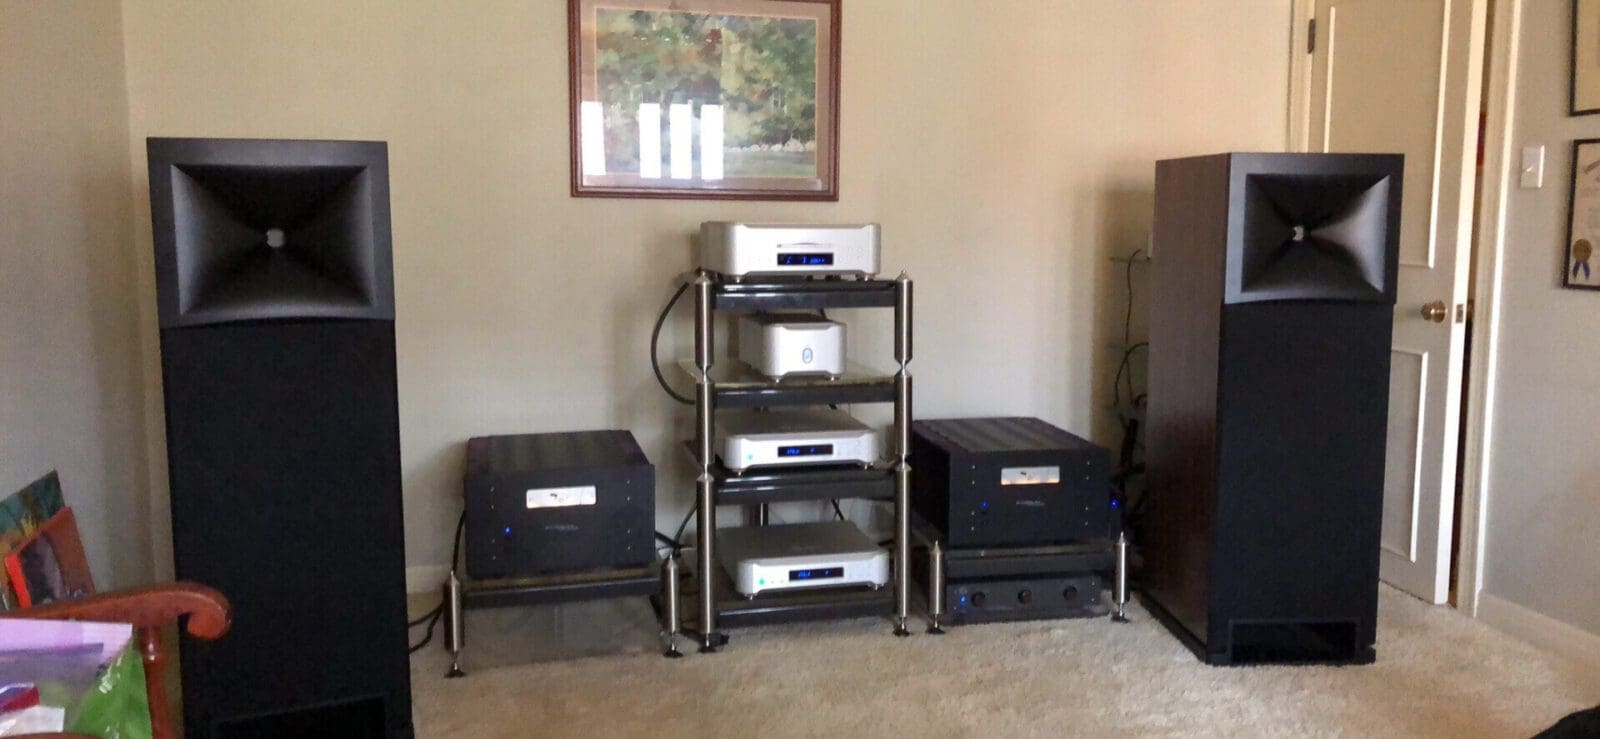 The Sound Station in Bartlesville client's Stereo System